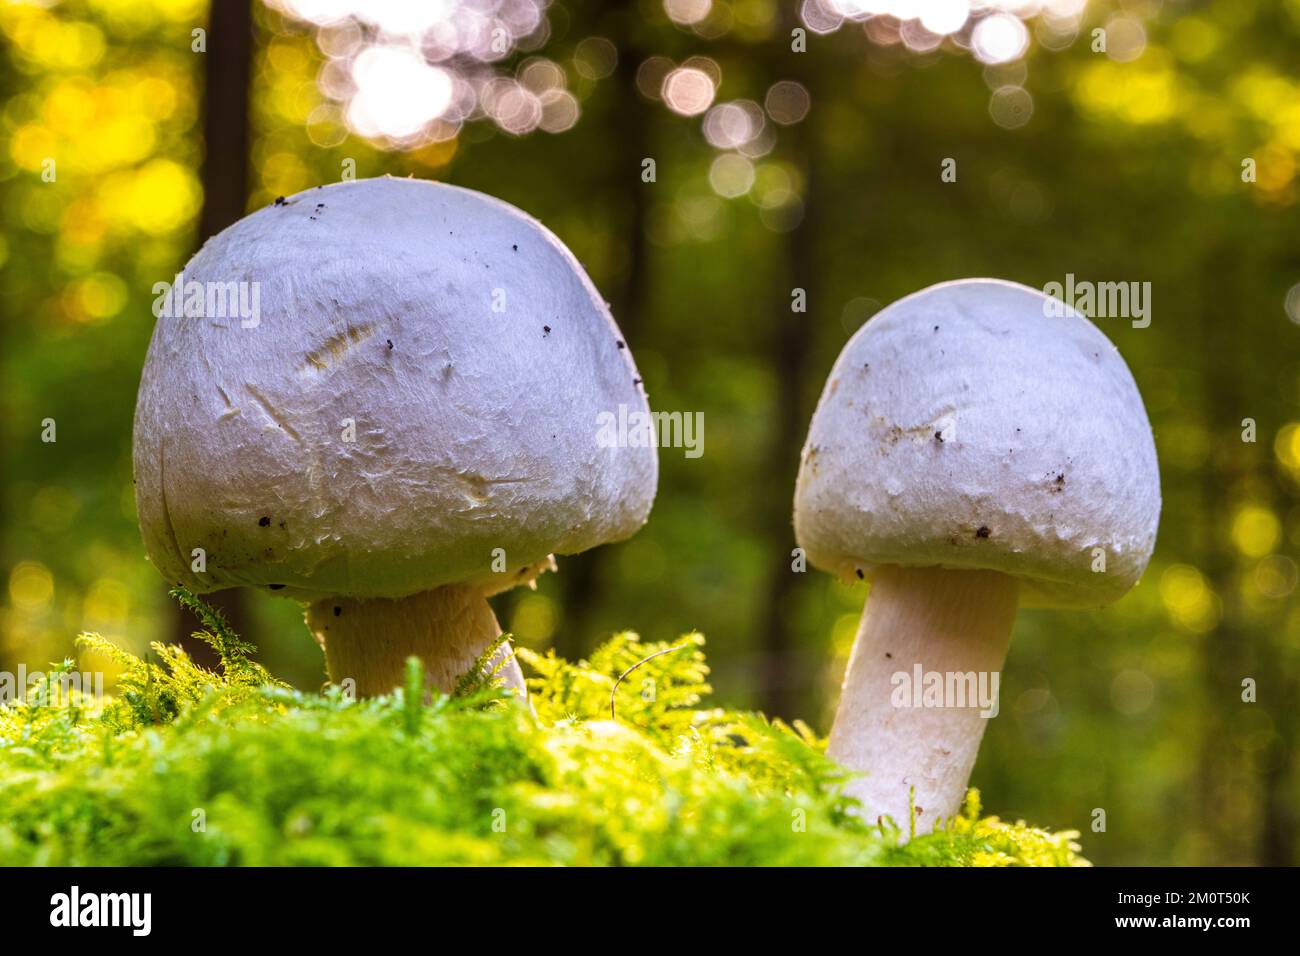 France, Somme (80), Cr?cy-en-Ponthieu, For?t de Cr?cy, Woodland mushrooms in autumn in the forest, Agaricus silvicola, Agaricus sylvicola Stock Photo